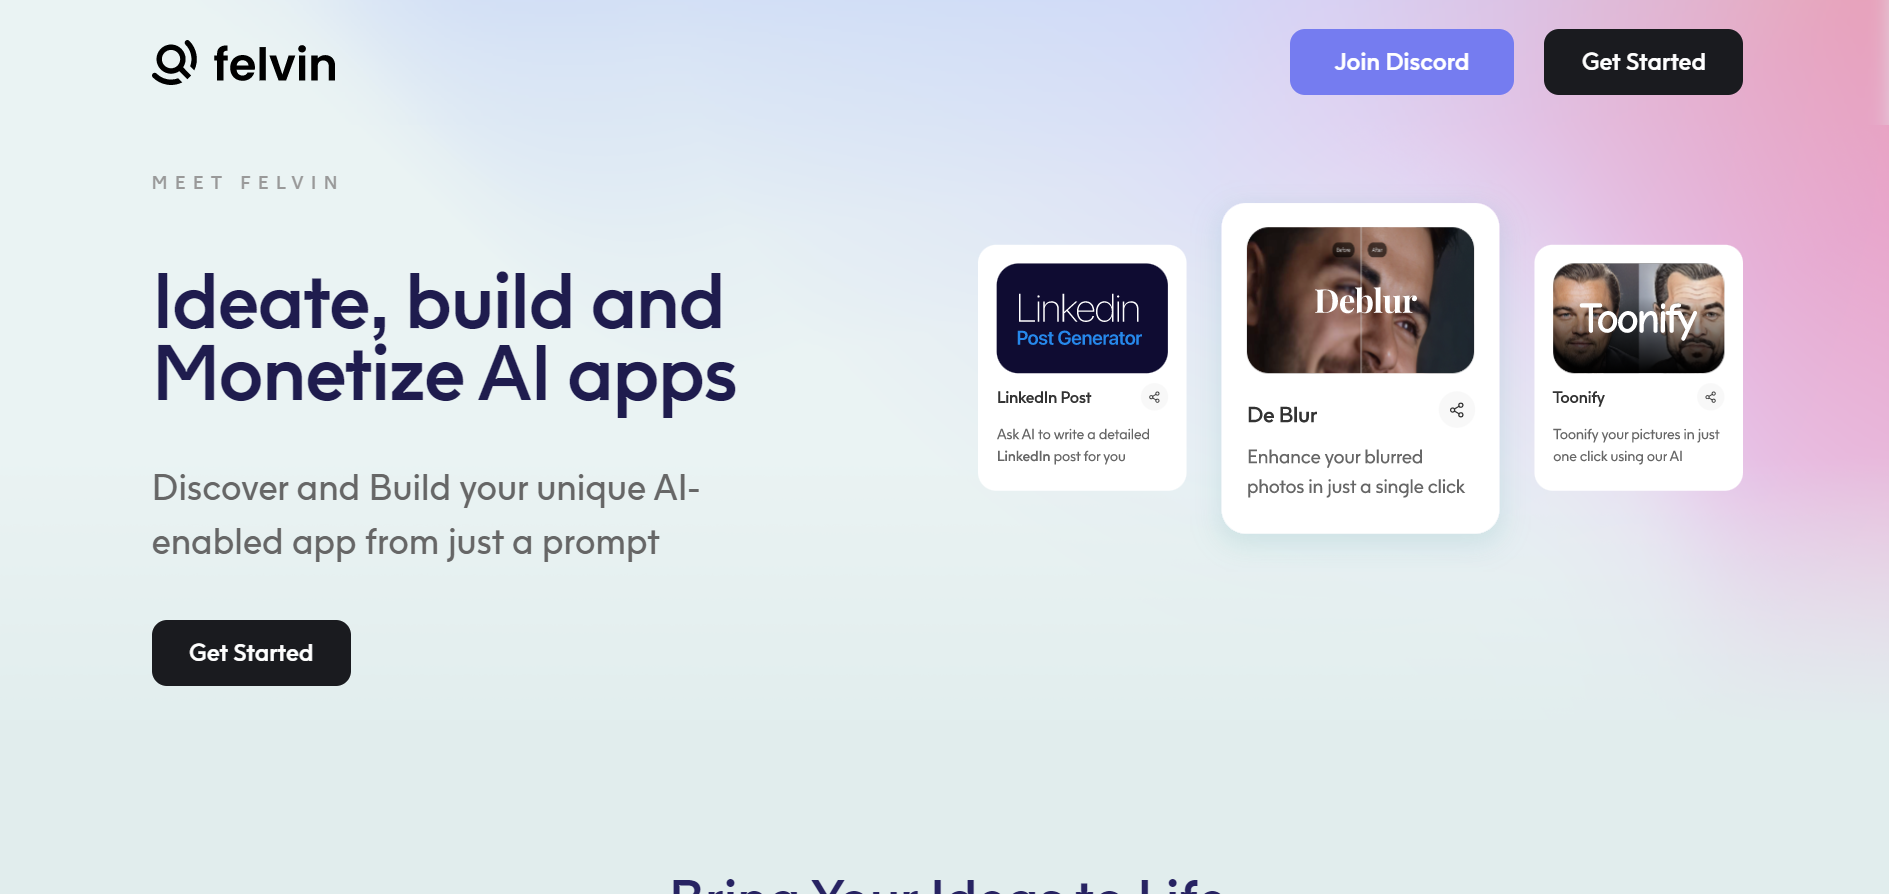 Unlock the Power of AI: Create, Discover, and Monetize Apps with Felvin.com!